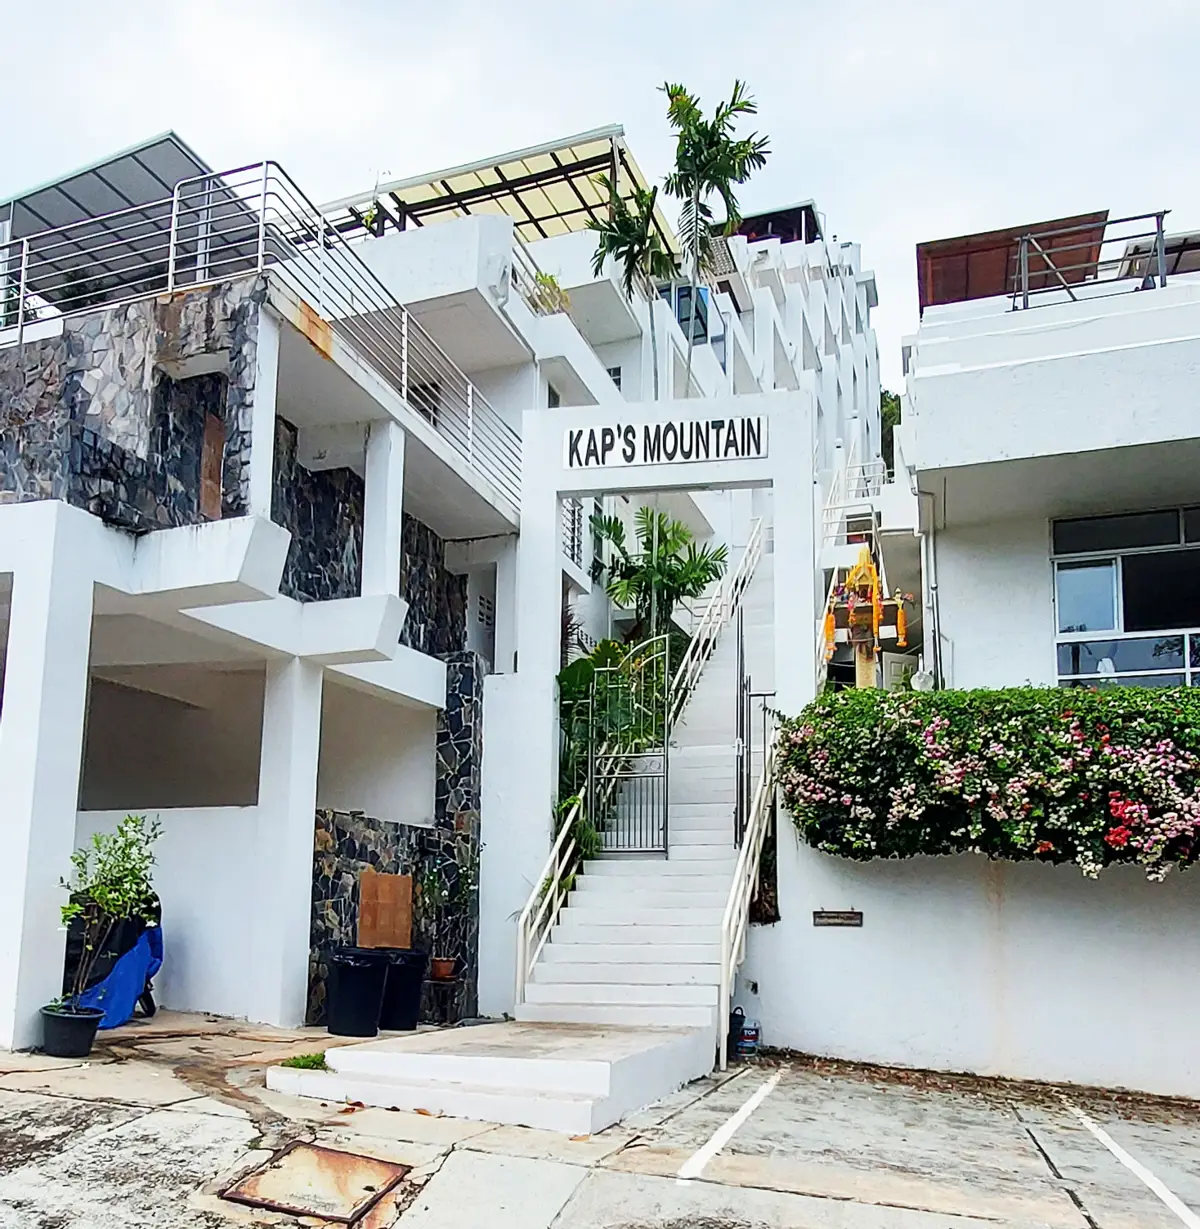 Condo with sea view in Kap's Mountain, Rayong